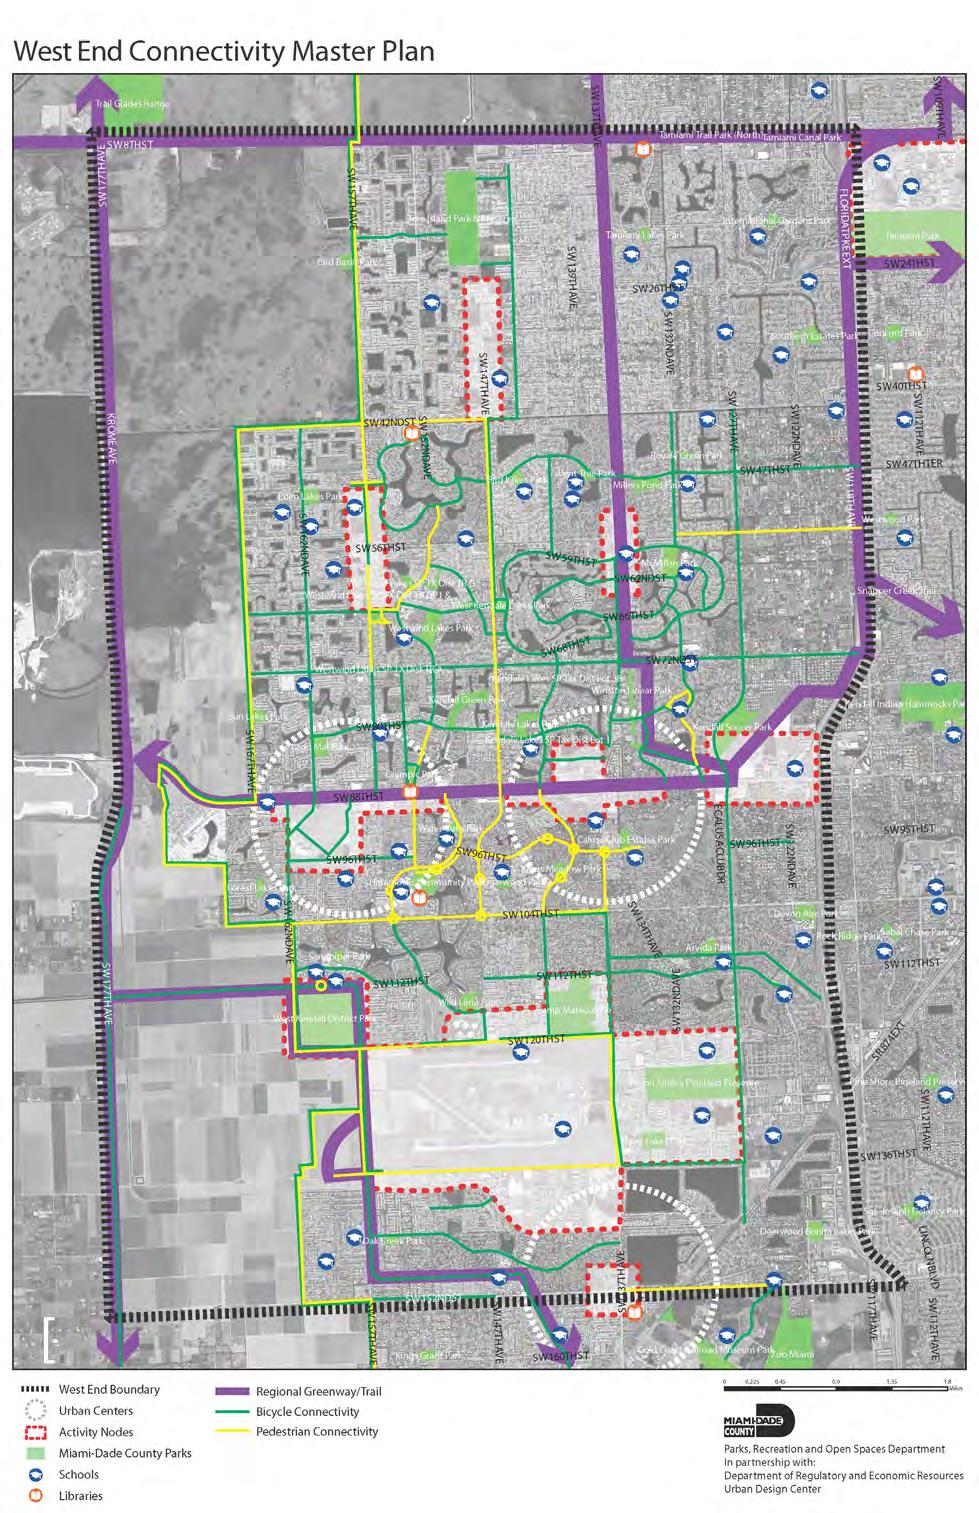 West End Connectivity Master Plan